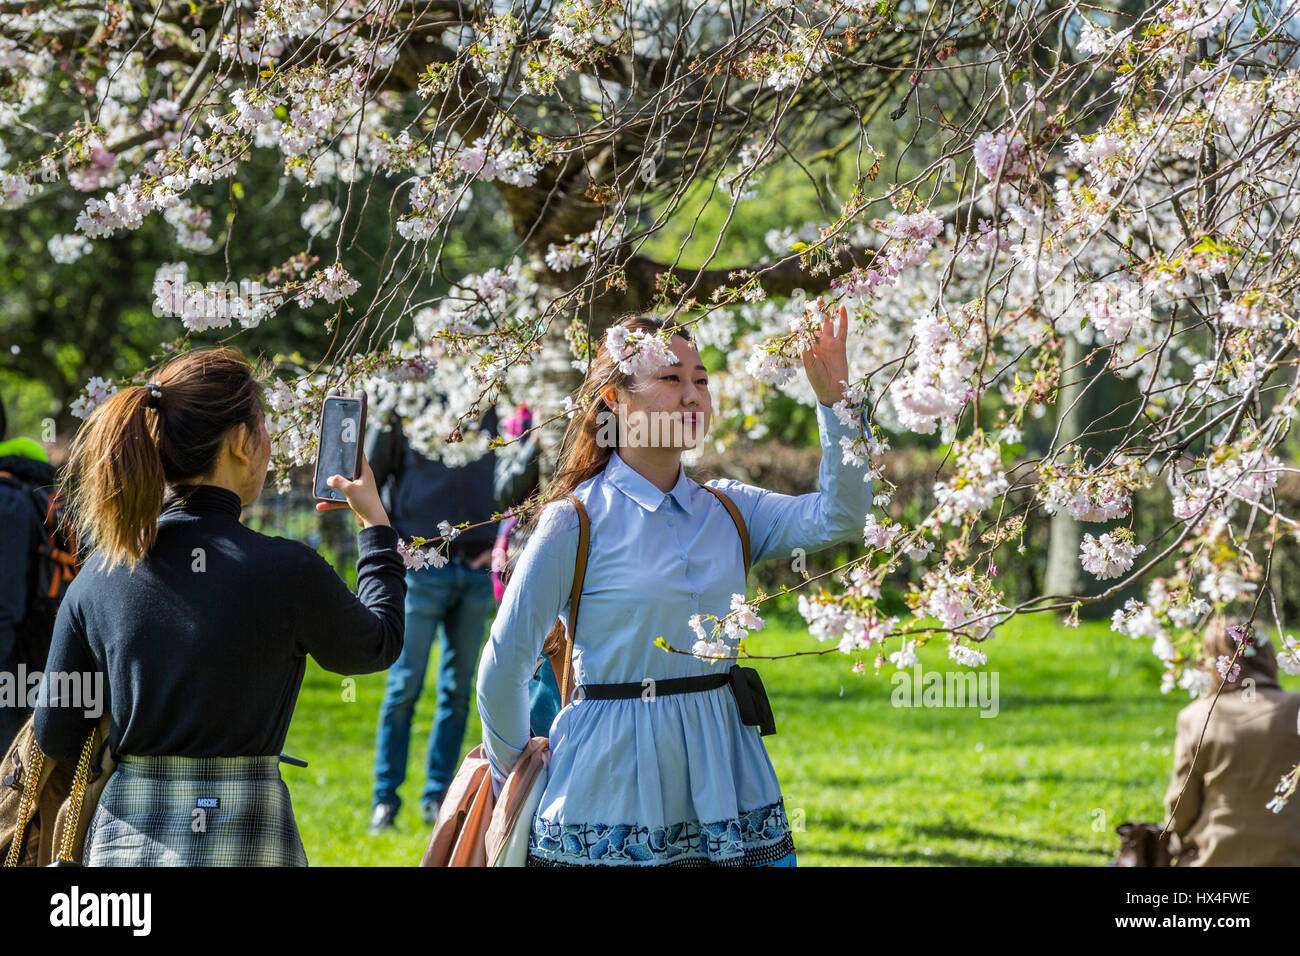 A beautiful sunny Saturday afternoon found Londoners and tourists alike taking selfies amongst the cherry blossom trees and enjoying the warm sunshine in The Regents Park, London, UK Stock Photo